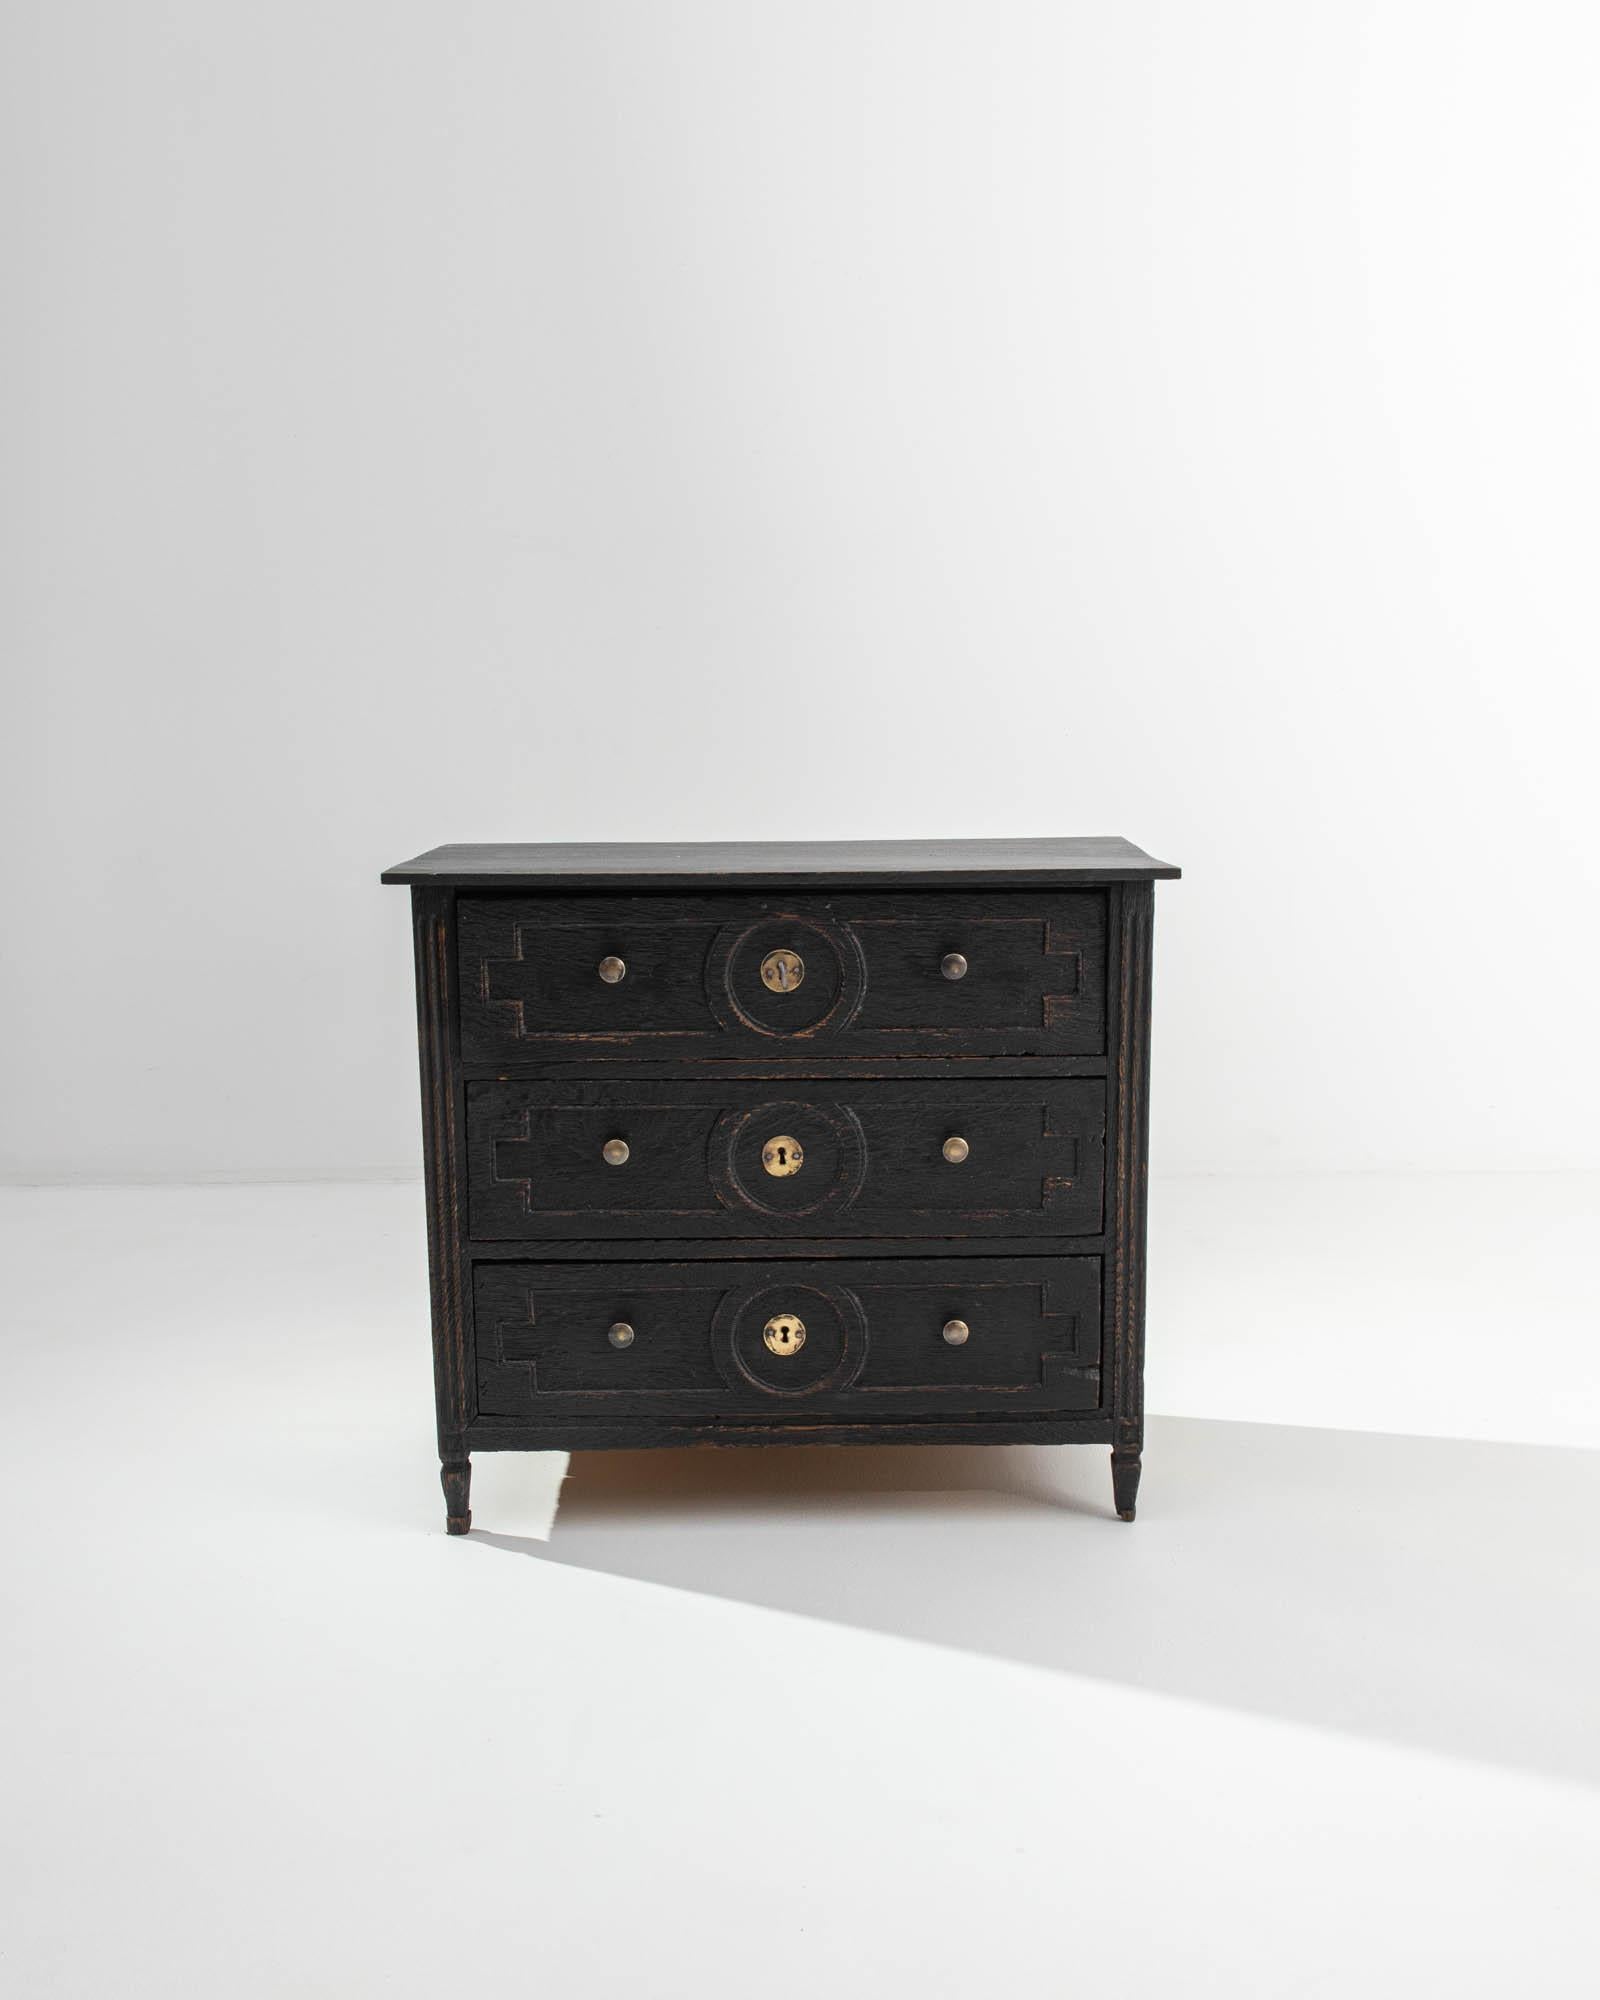 A wooden chest of drawers crafted in the Netherlands in the 19th century. Moody, yet crackling with an enigmatic energy, this chest of drawers is a picture of elegance and unique personality. The aged wood that composes its drawer fronts as well as